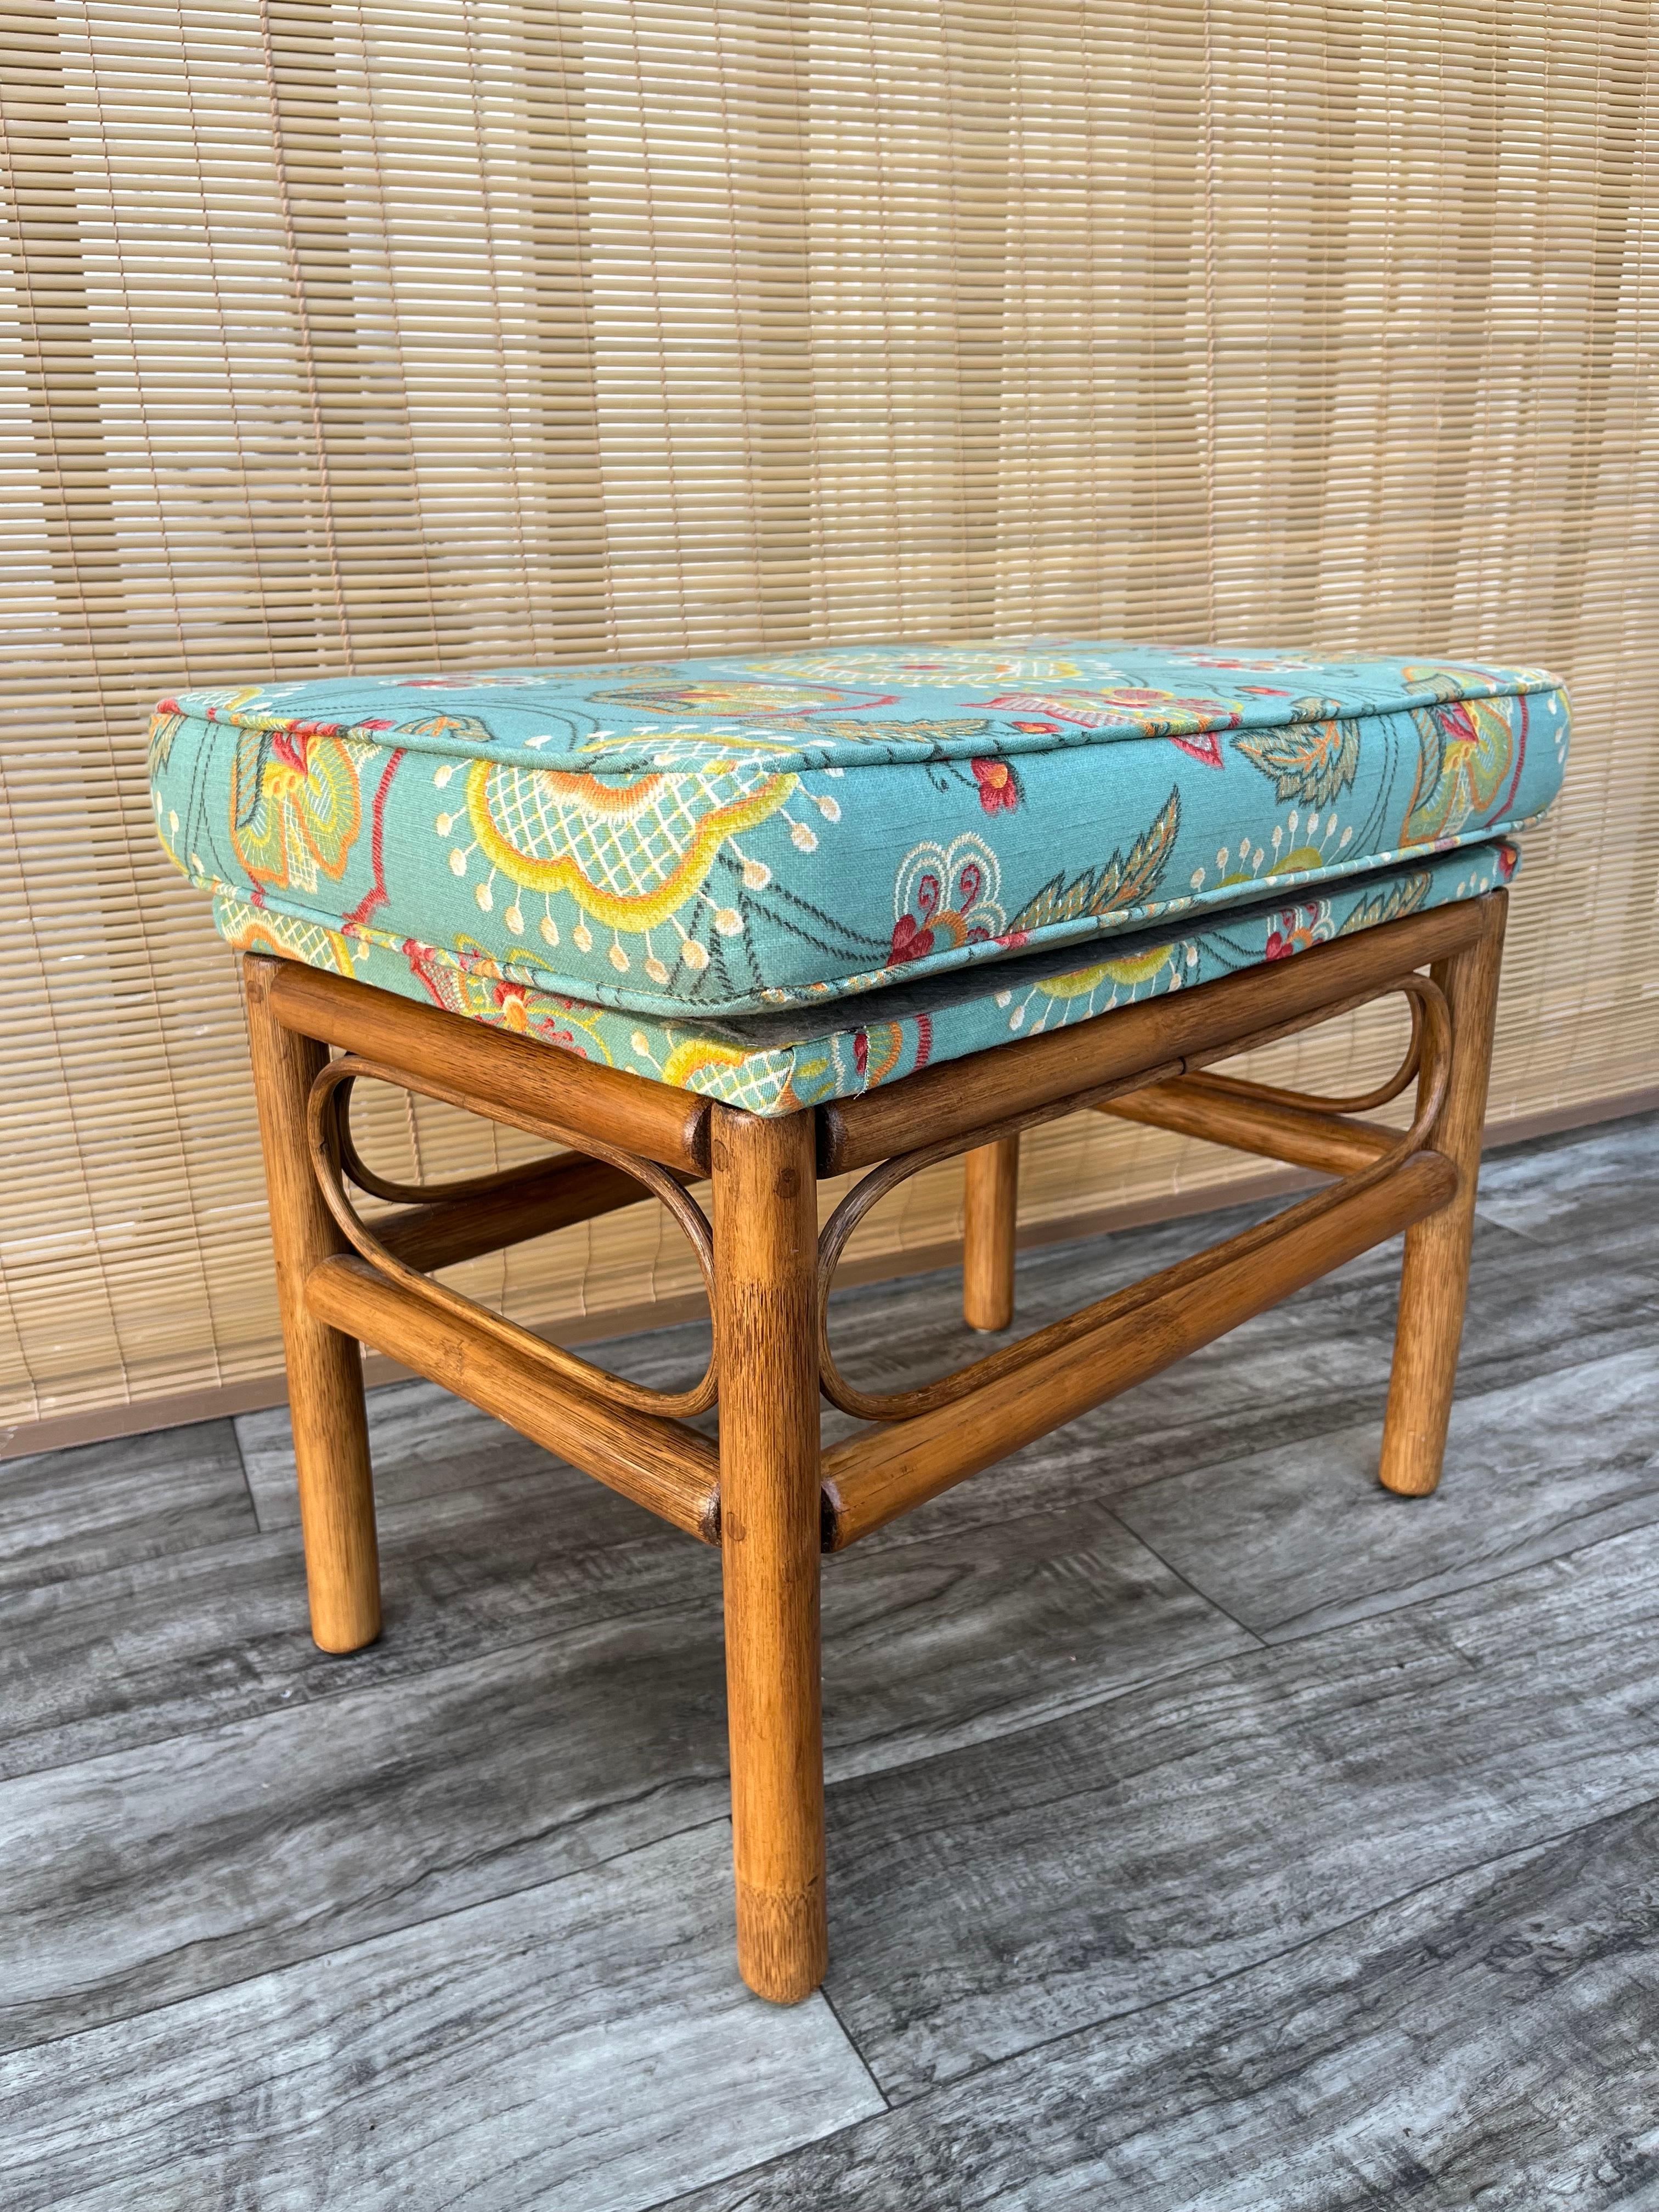 Wicker Vintage Coastal Style, Boho Chic Rattan Ottoman / Accent Bench For Sale